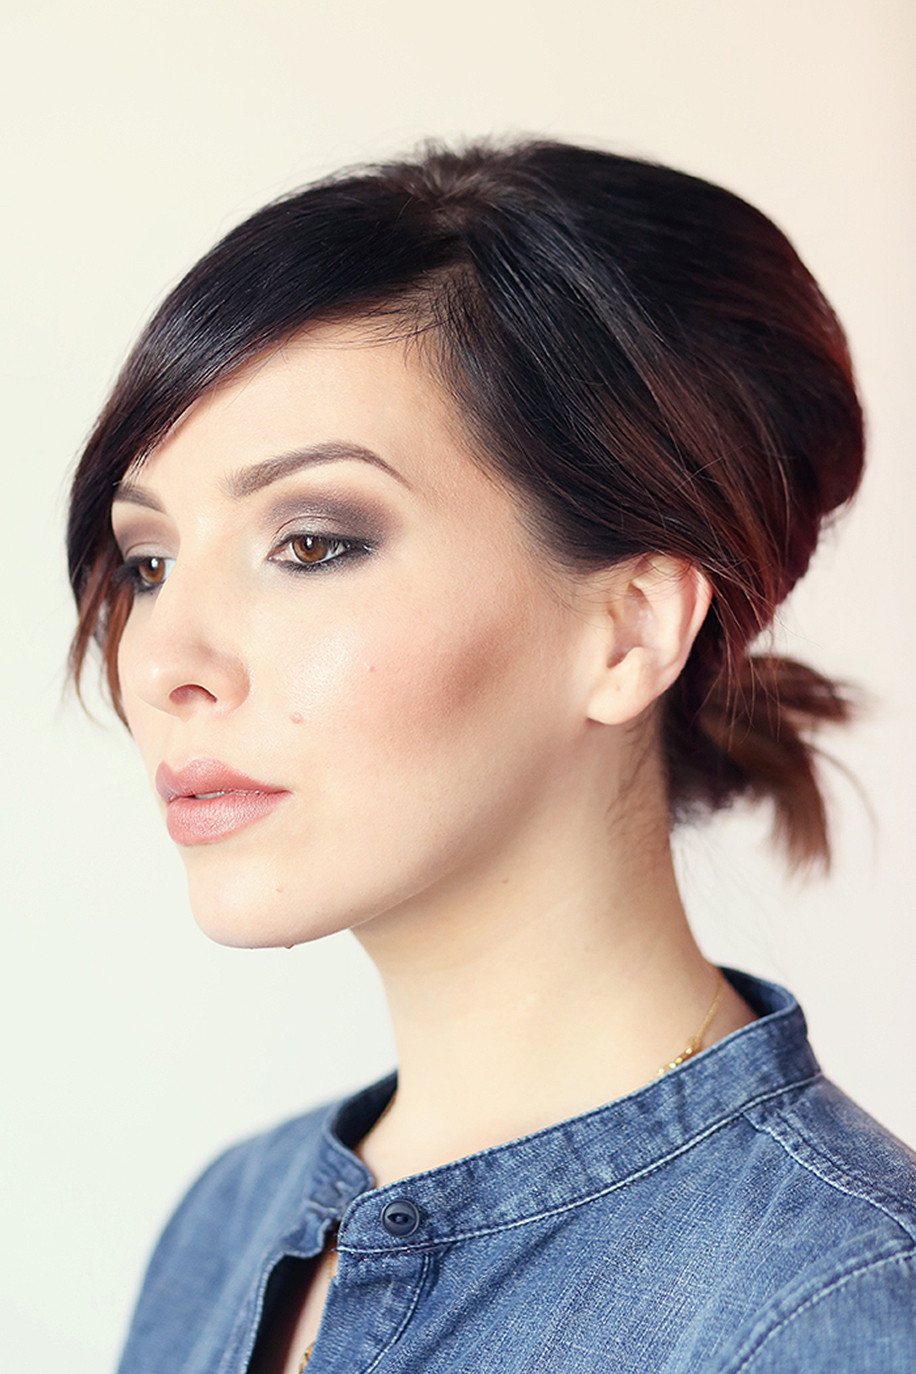 Cute Medium Hairstyles
 Cute Short Hairstyles to Step Up Your Hair Game Big Time